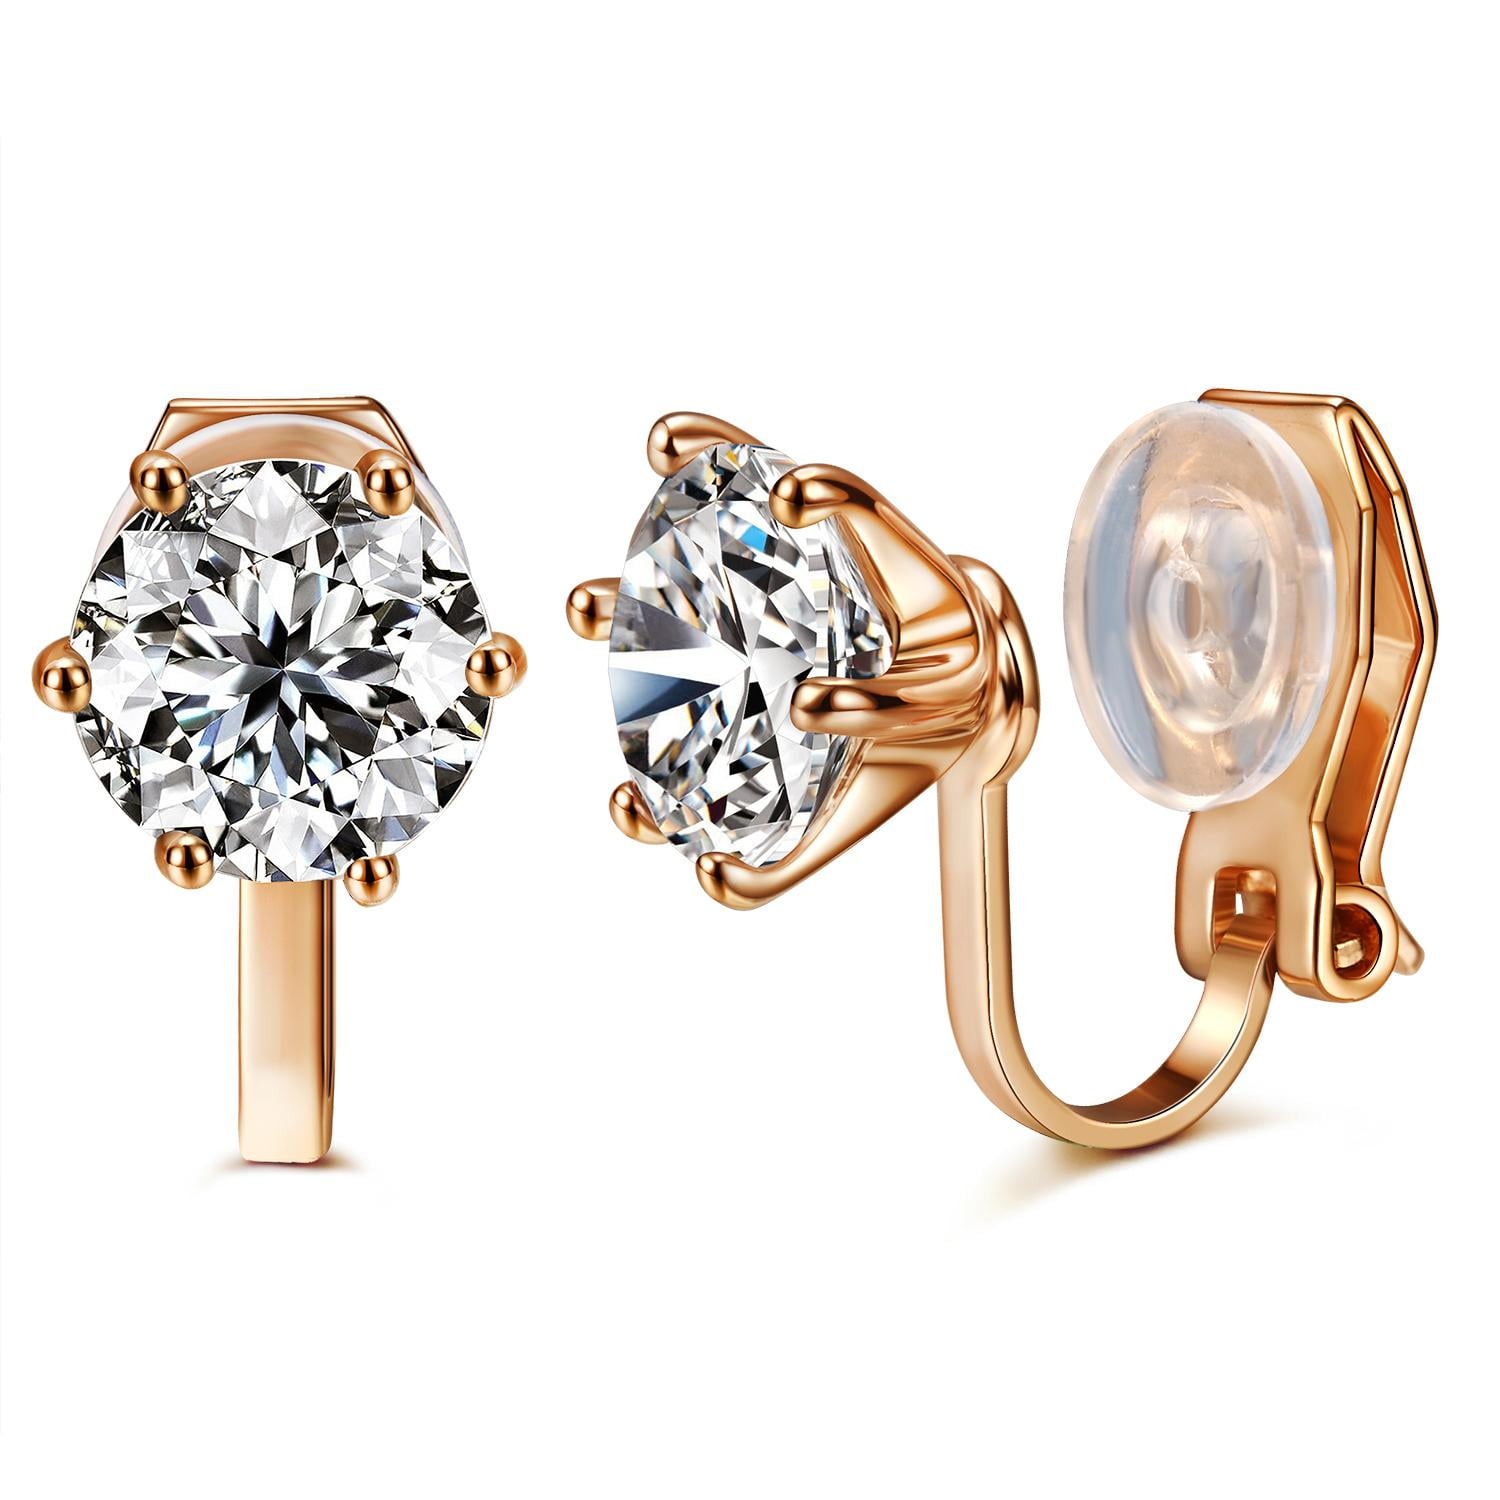 AllenCOCO 14K Rose Gold Plated Clip On Halo Earring AAAAA 1 5 Ct Cubic Zirconia Solitaire Studs Earrings Women Girls Gifts Non Pierced Rubber Pads 7 ddc15c5f eeb0 4595 914e 576481460af7.2a6515dc95d057dfec15d2e2dce977bc